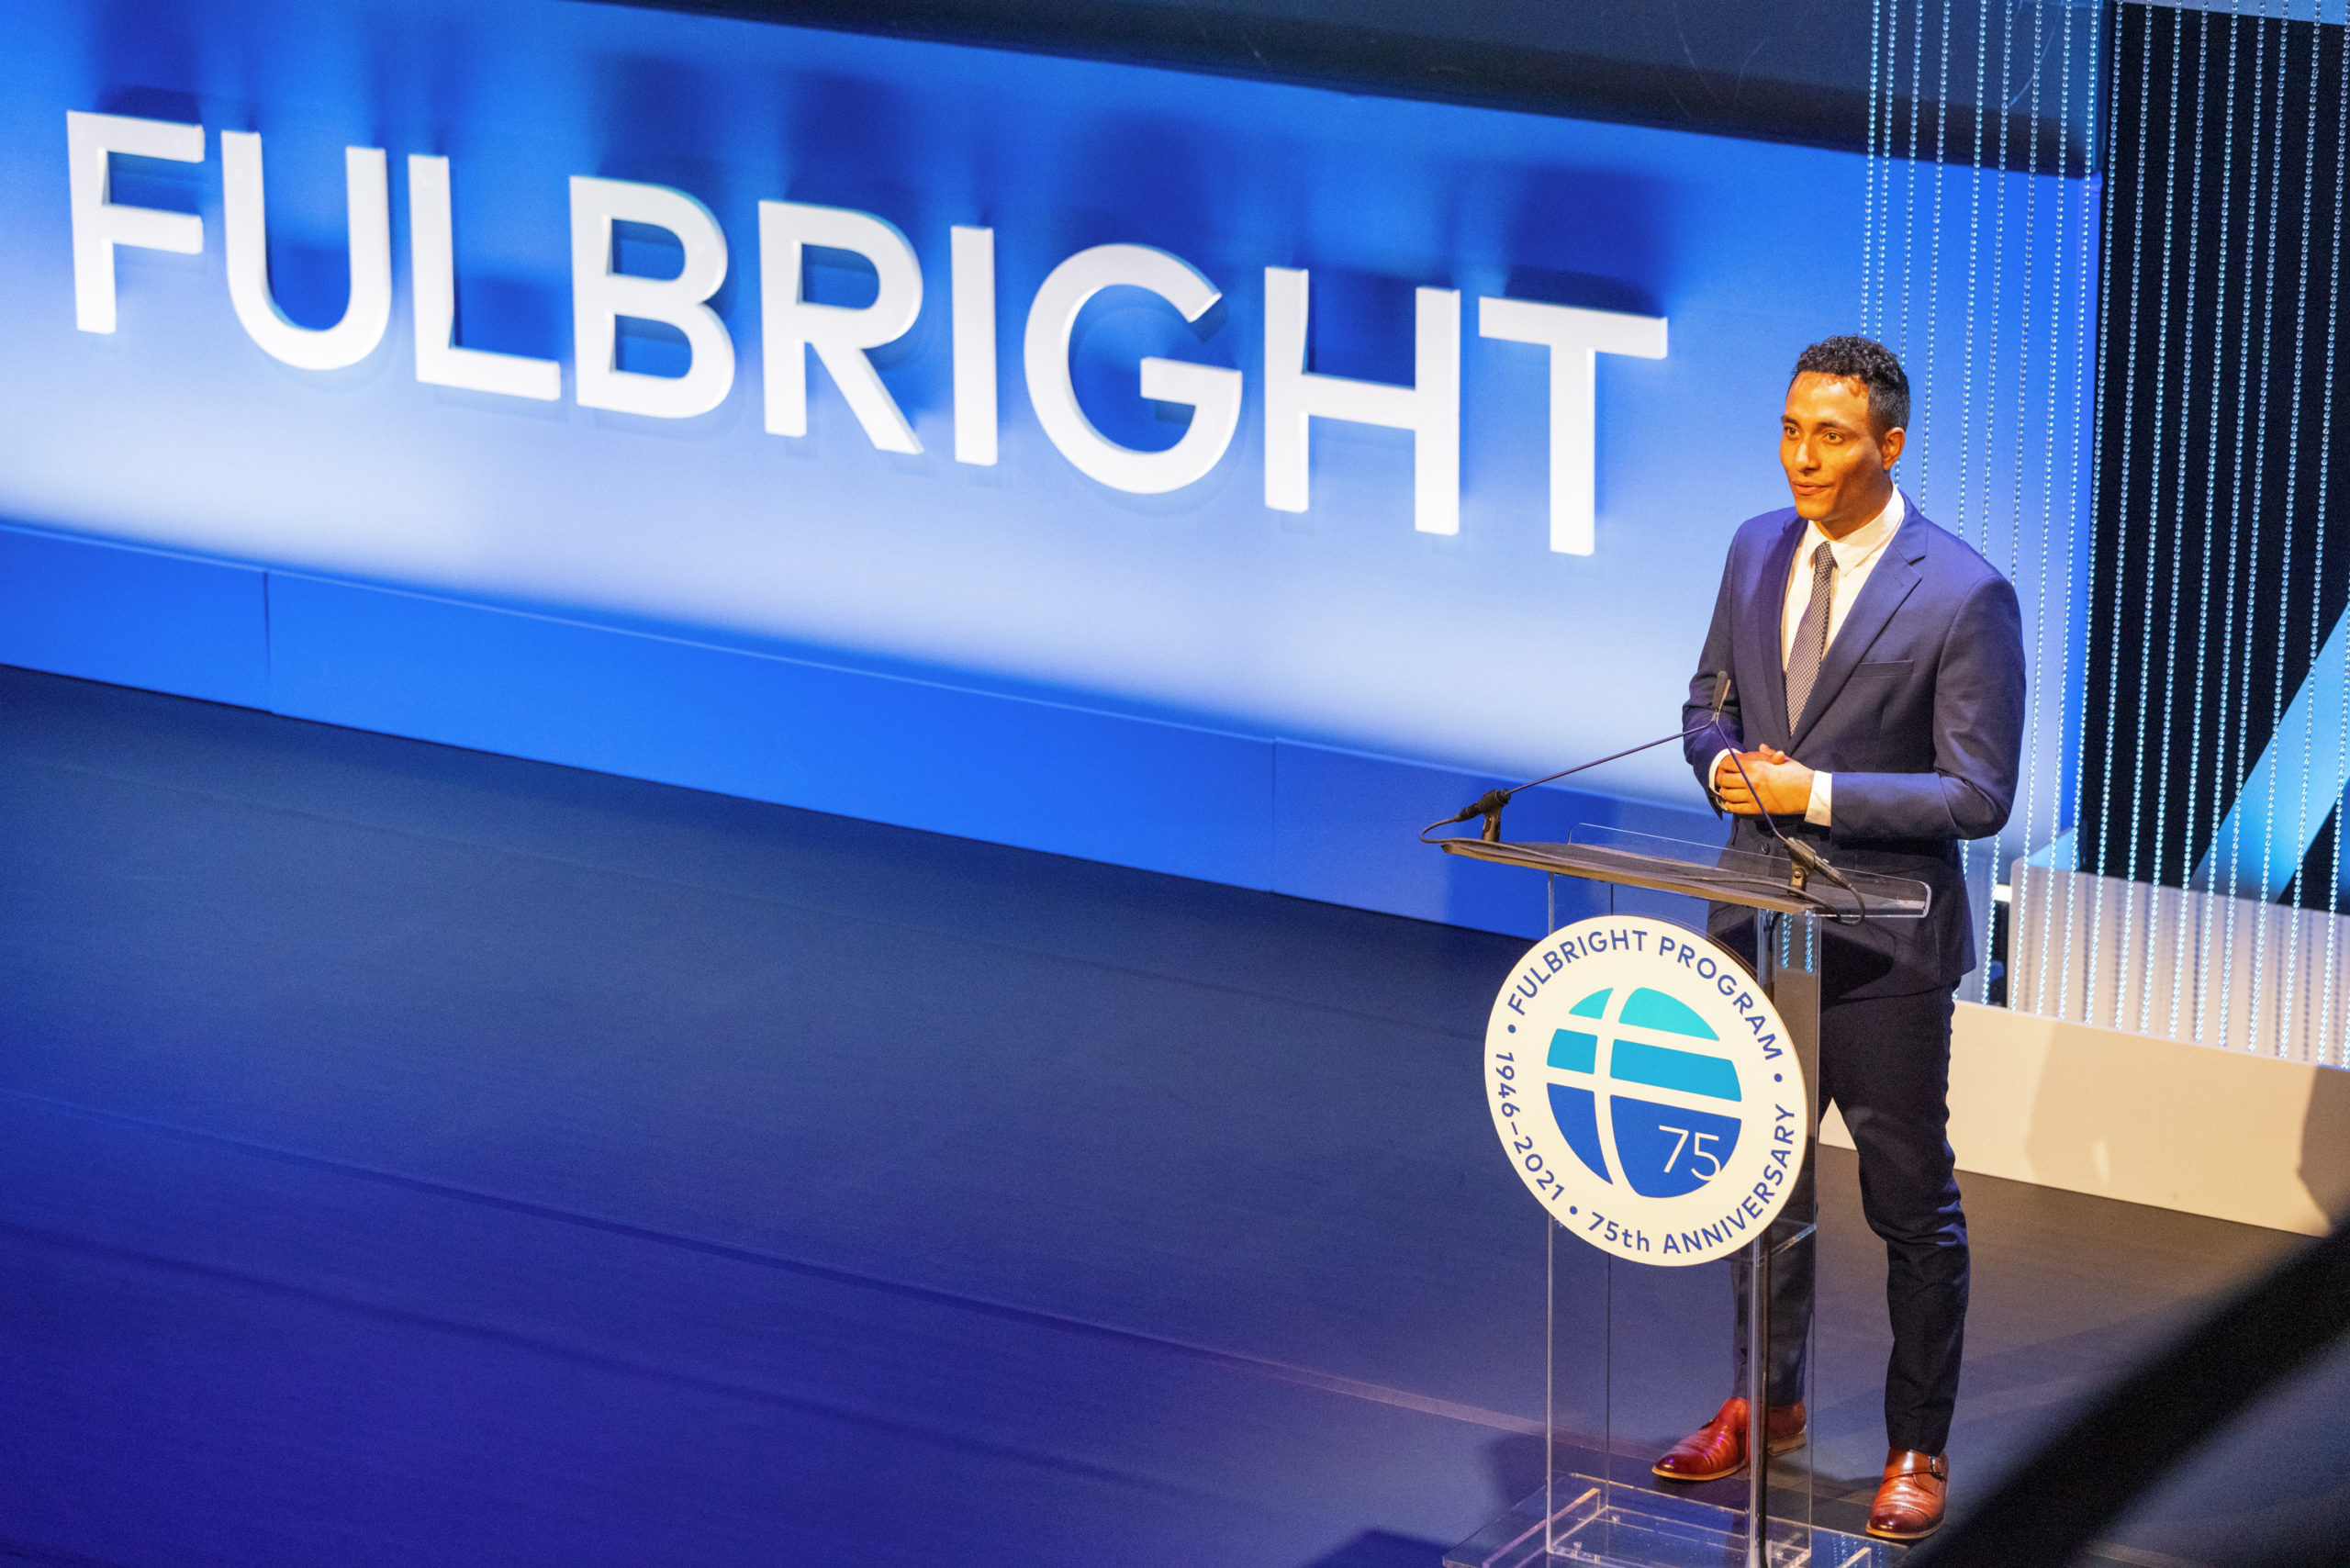 A person standing at a podium in a suit. The podium has a Fulbright logo on it and next to the person is "Fulbright" in big letters on the stage.